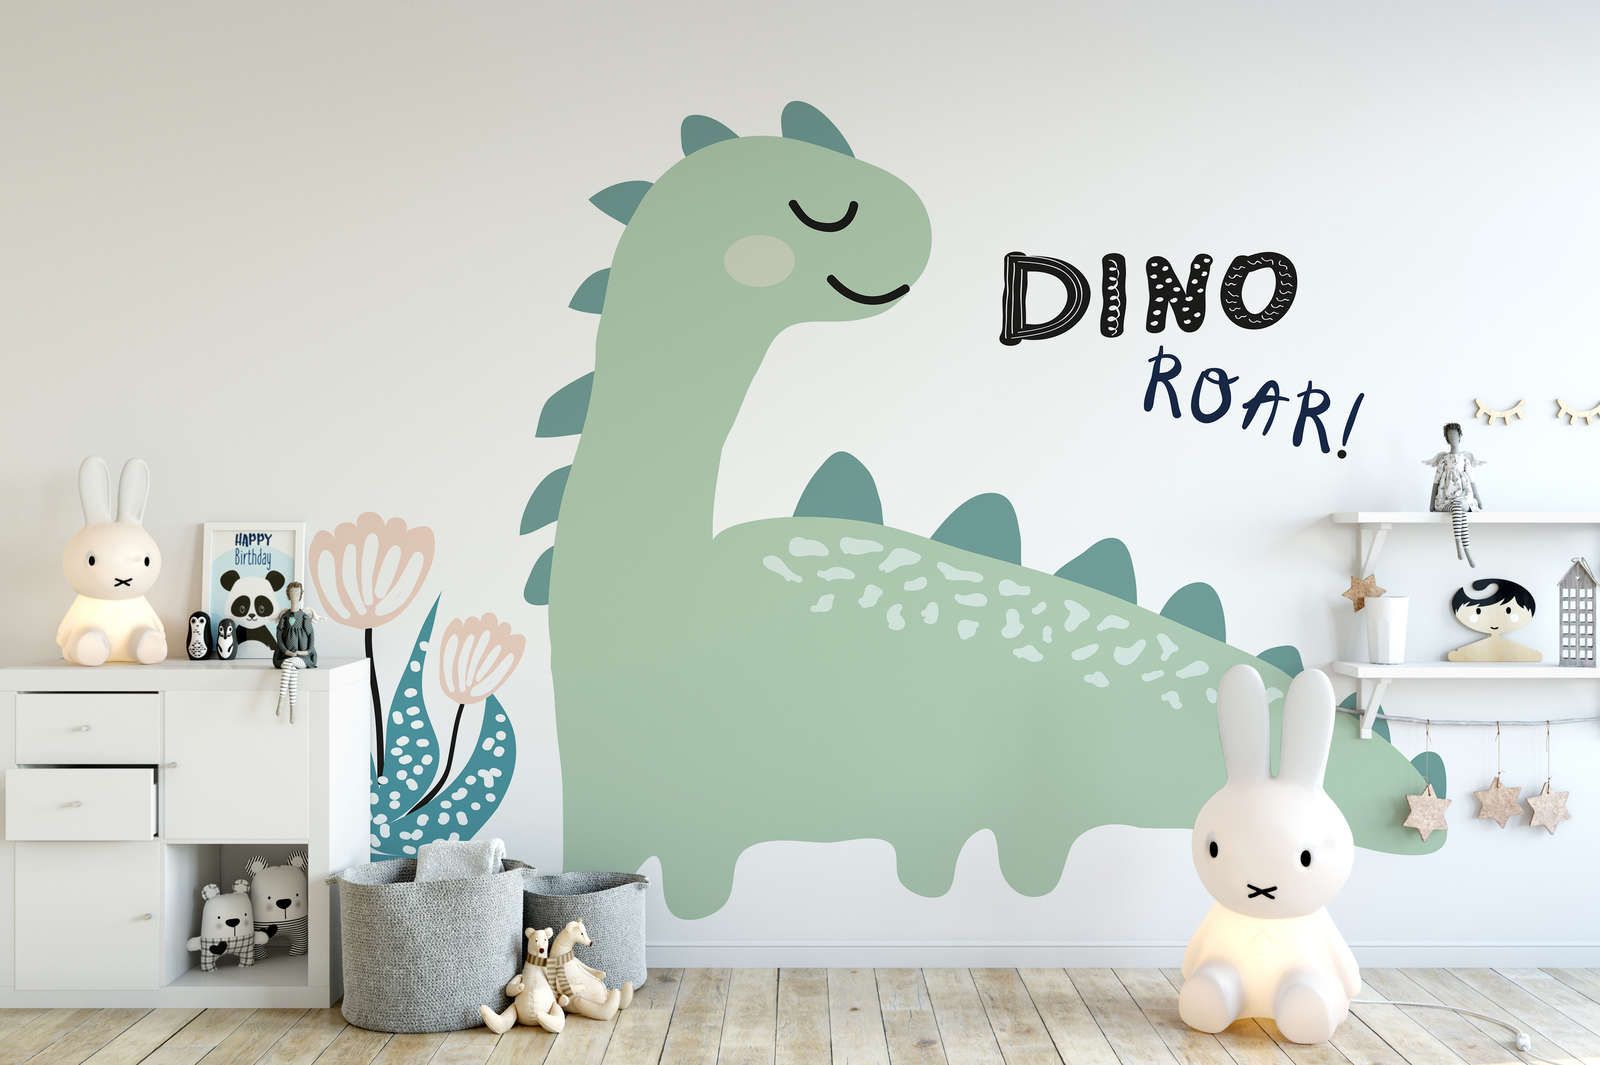             Painted Dinosaur Wallpaper - Smooth & Pearlescent Non-woven
        